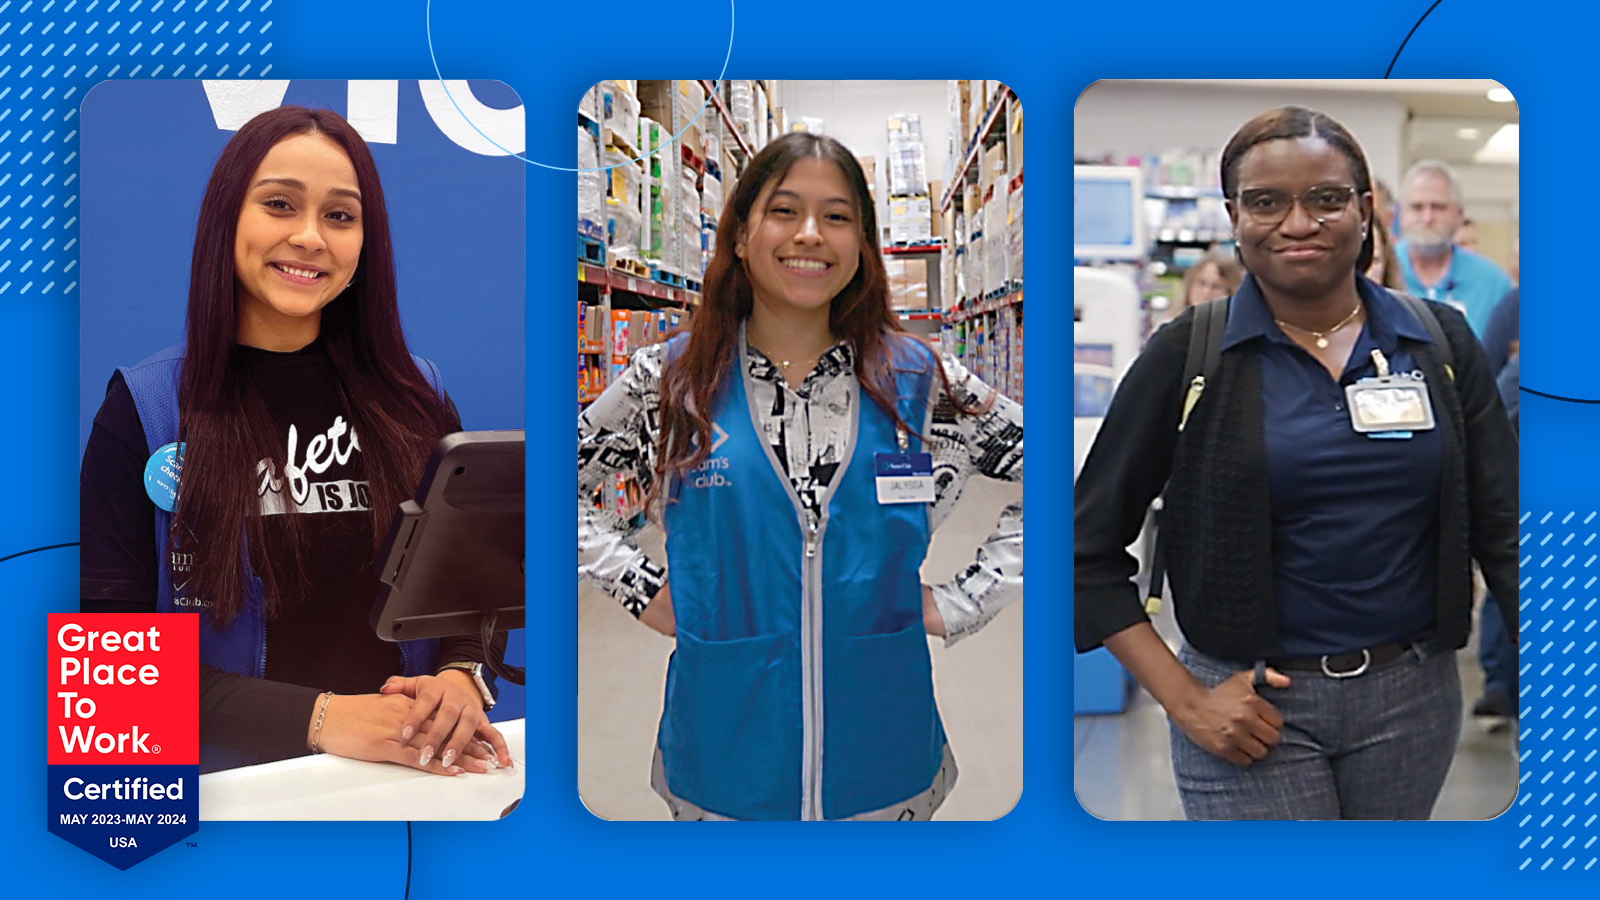 Sam’s Club Is Creating New Paths for Opportunity and Belonging Lead Image of a woman standing in a fulfillment center